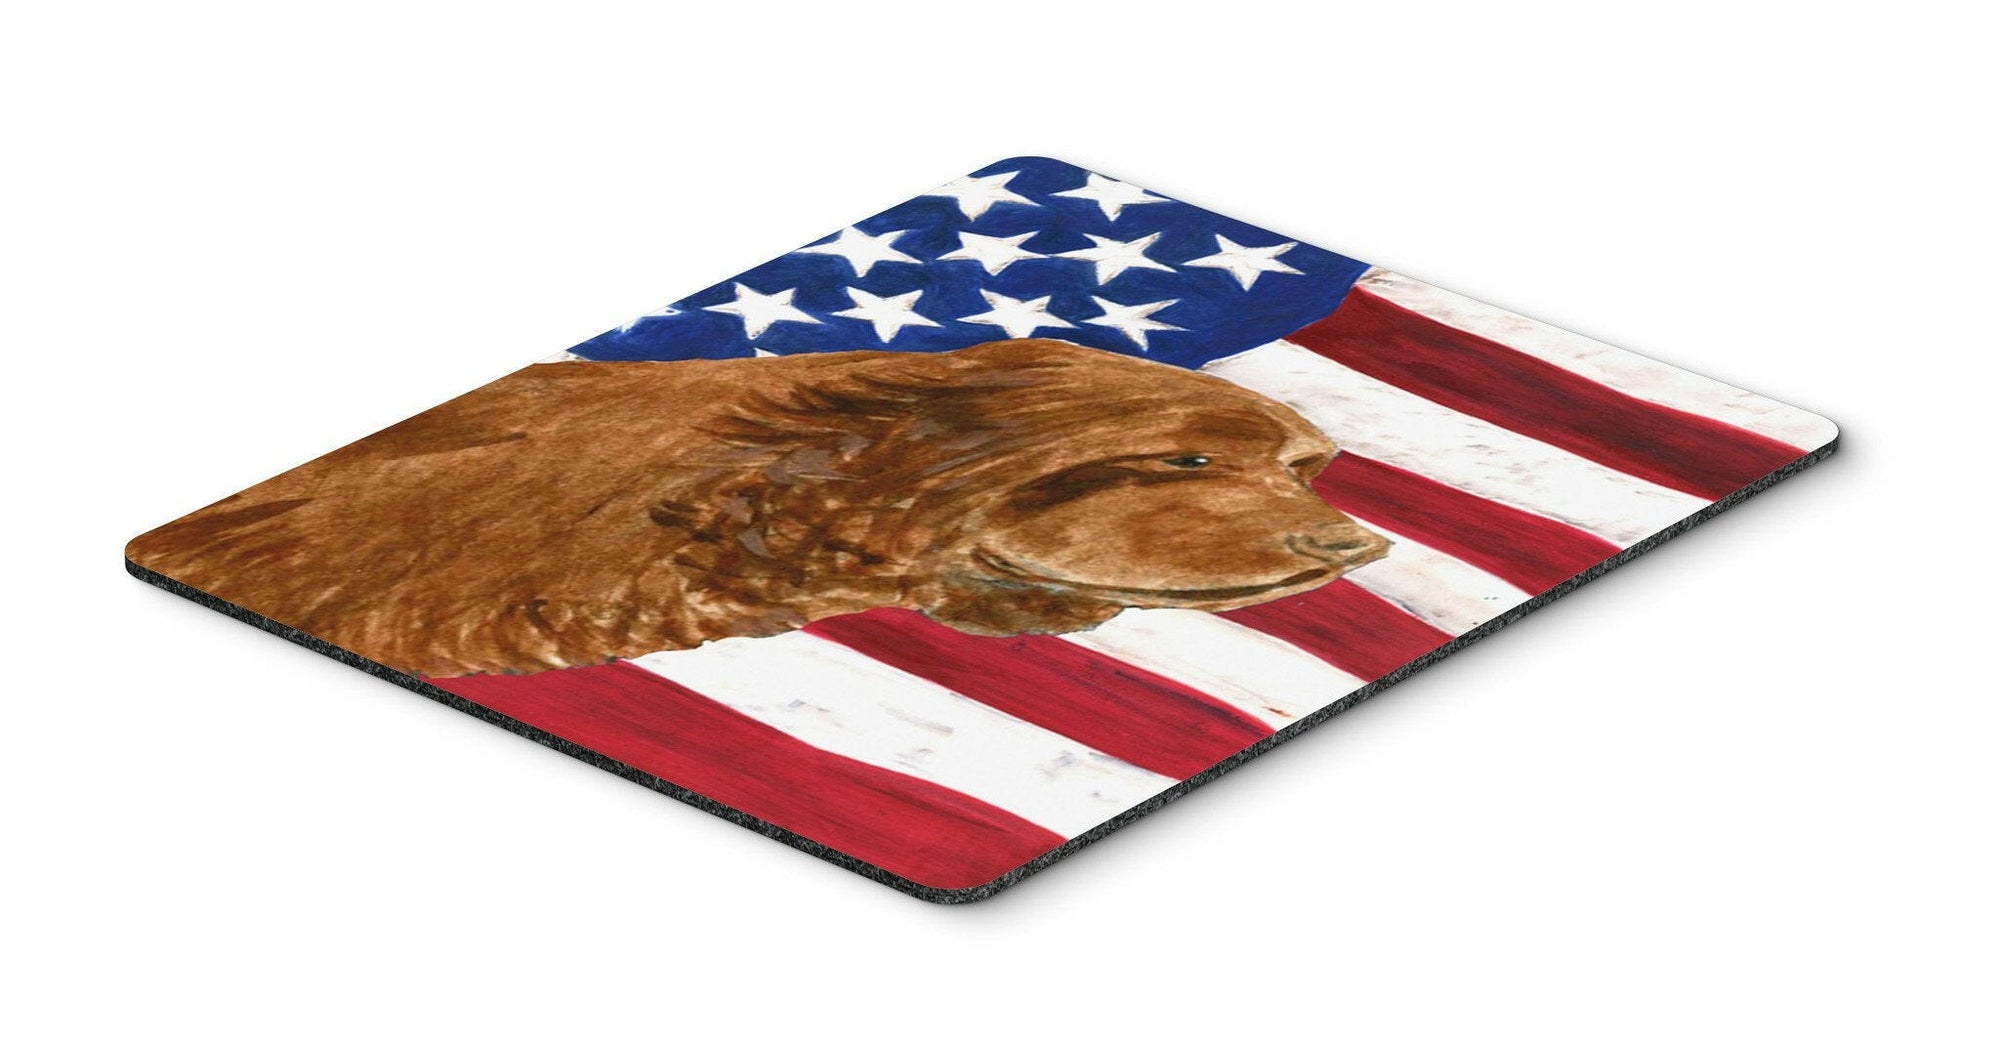 USA American Flag with Sussex Spaniel Mouse Pad, Hot Pad or Trivet by Caroline's Treasures